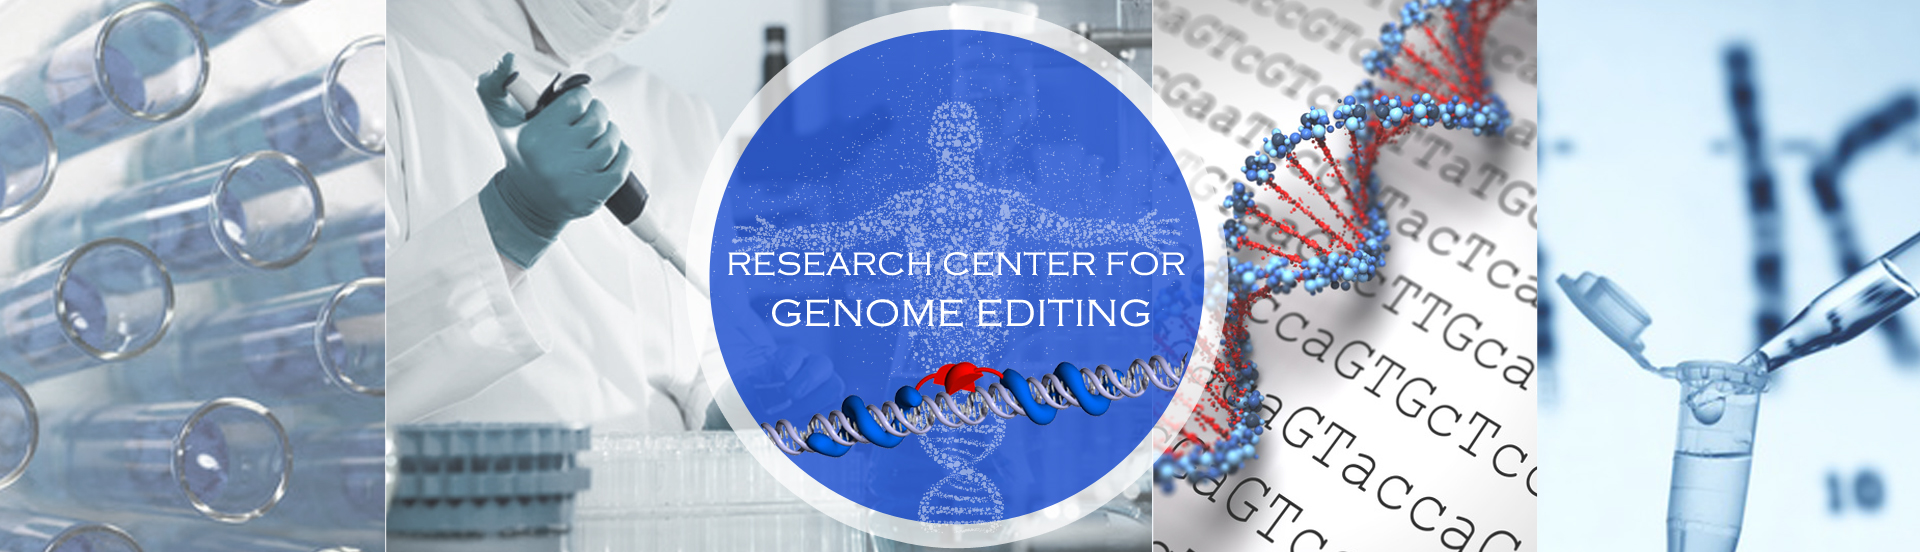 Research Center for Genome Editing